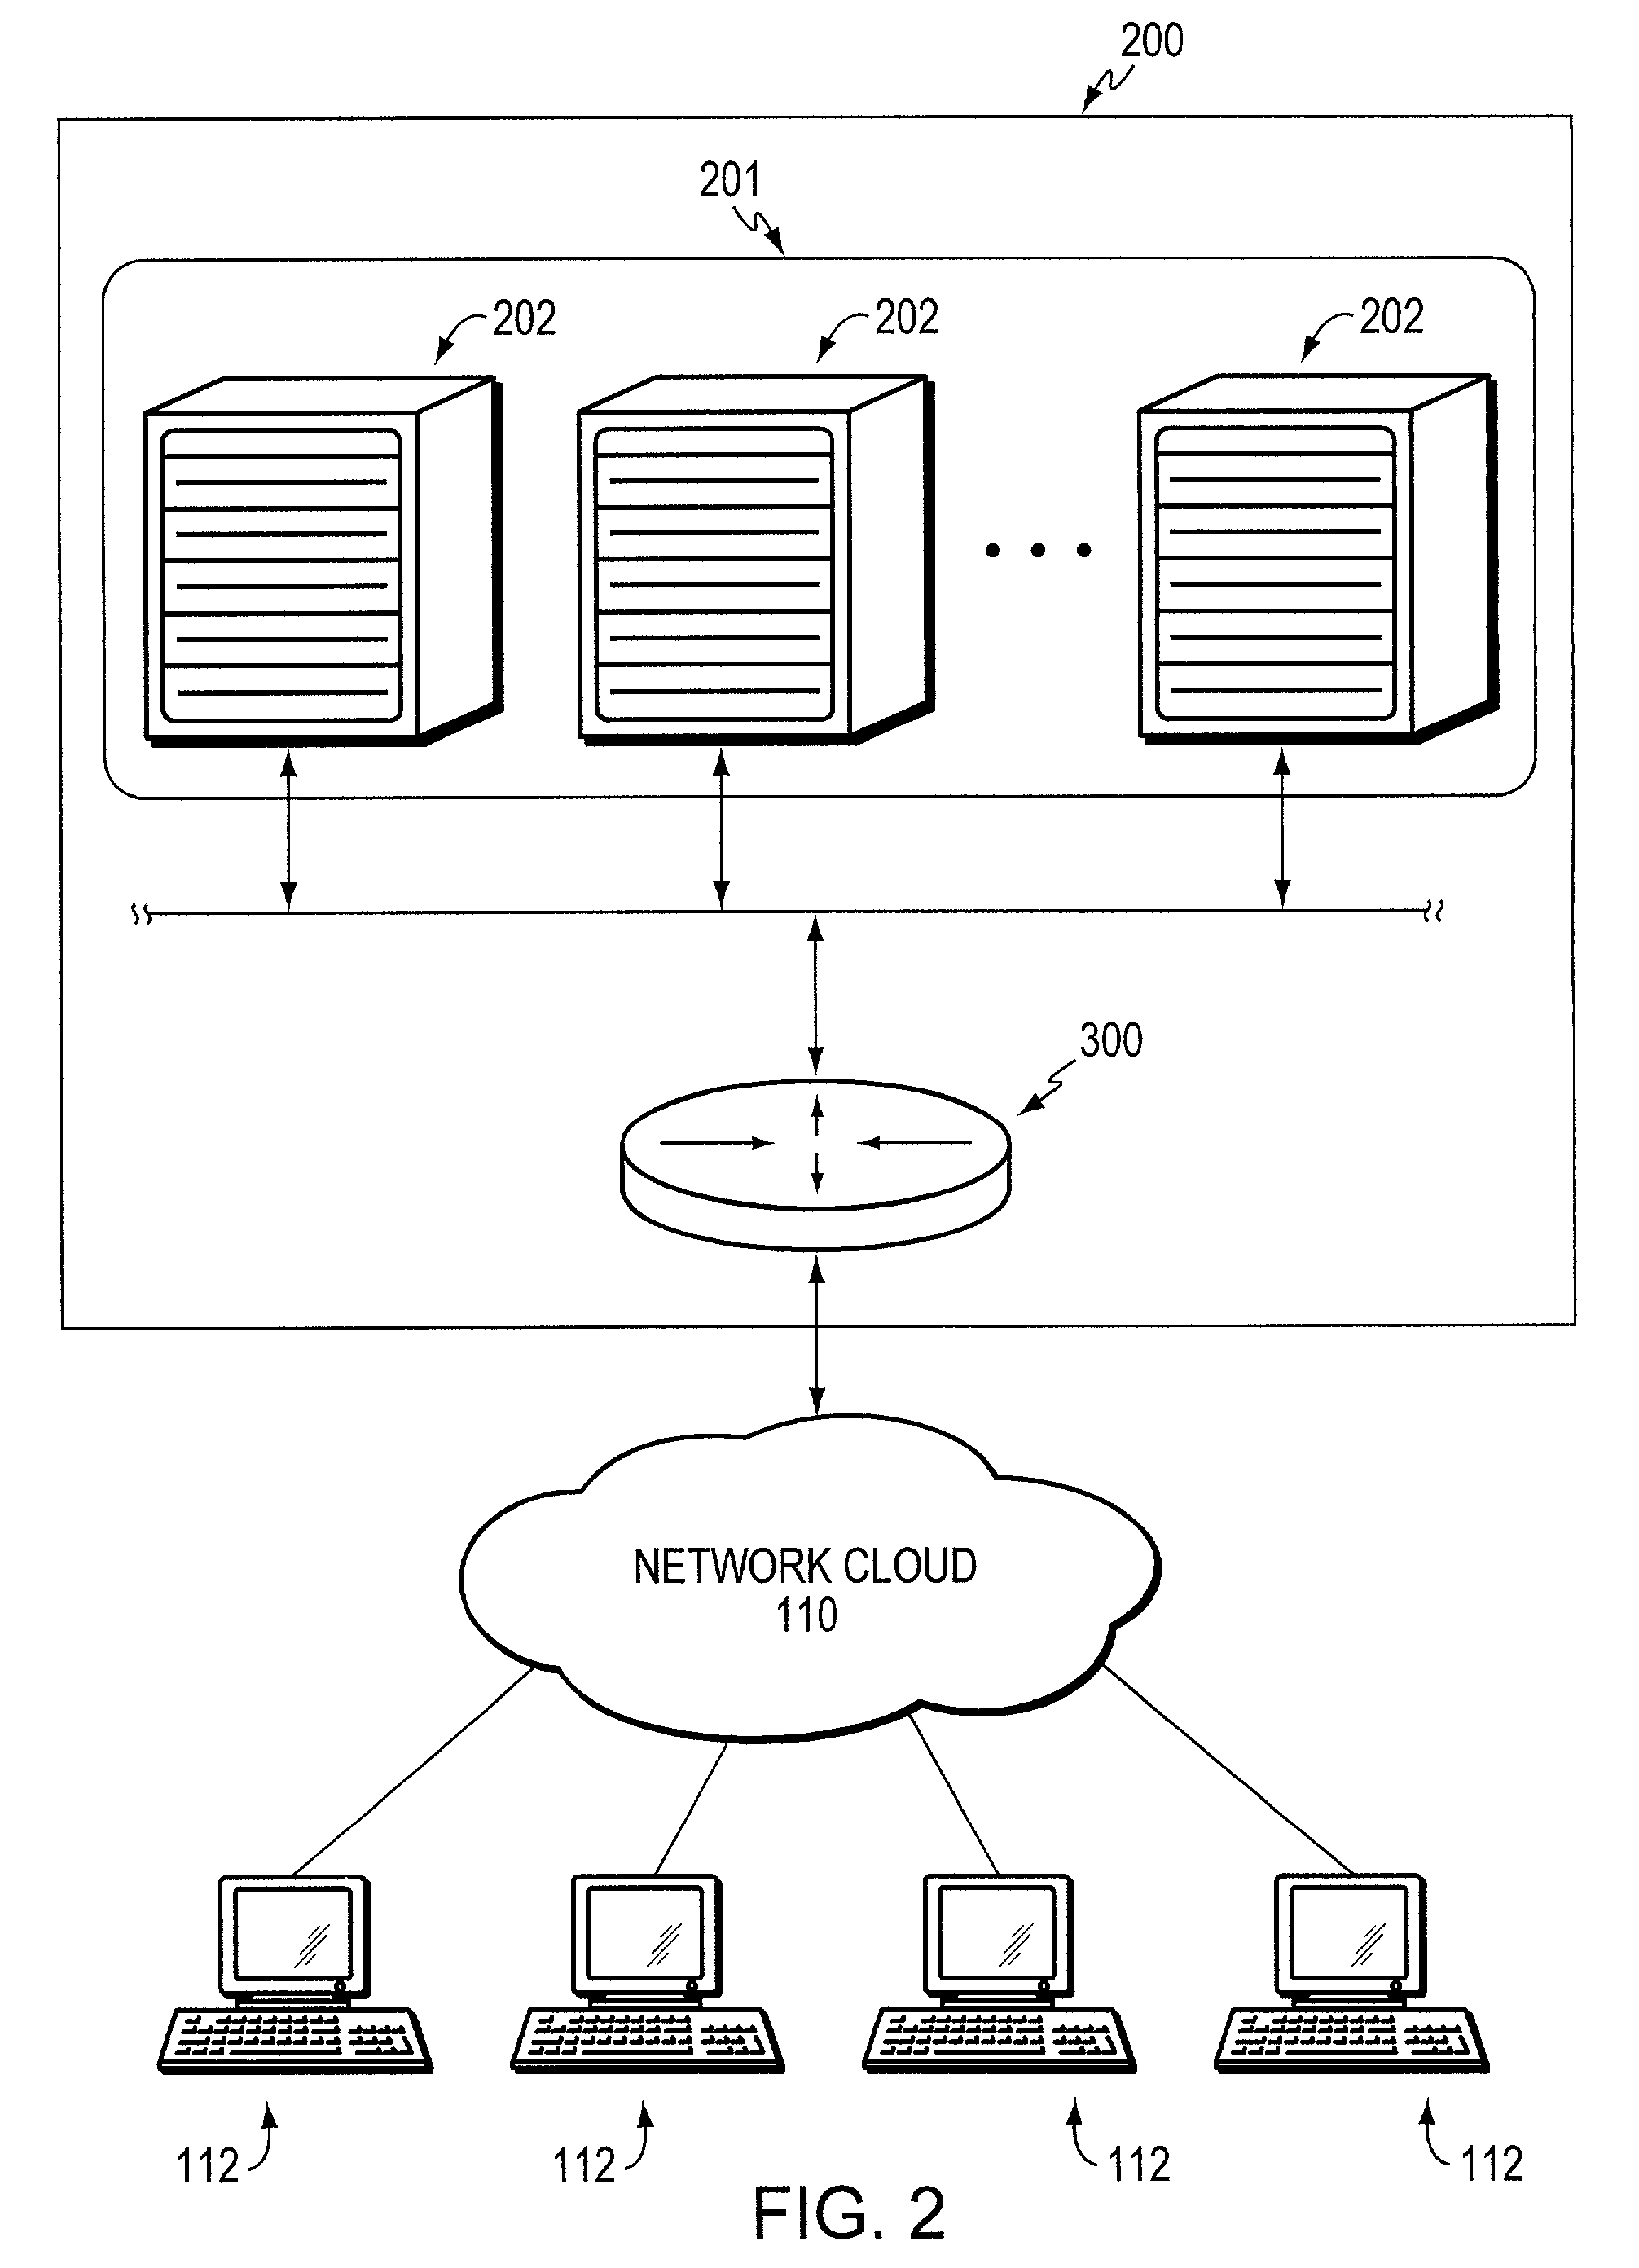 Highly scalable least connections load balancing